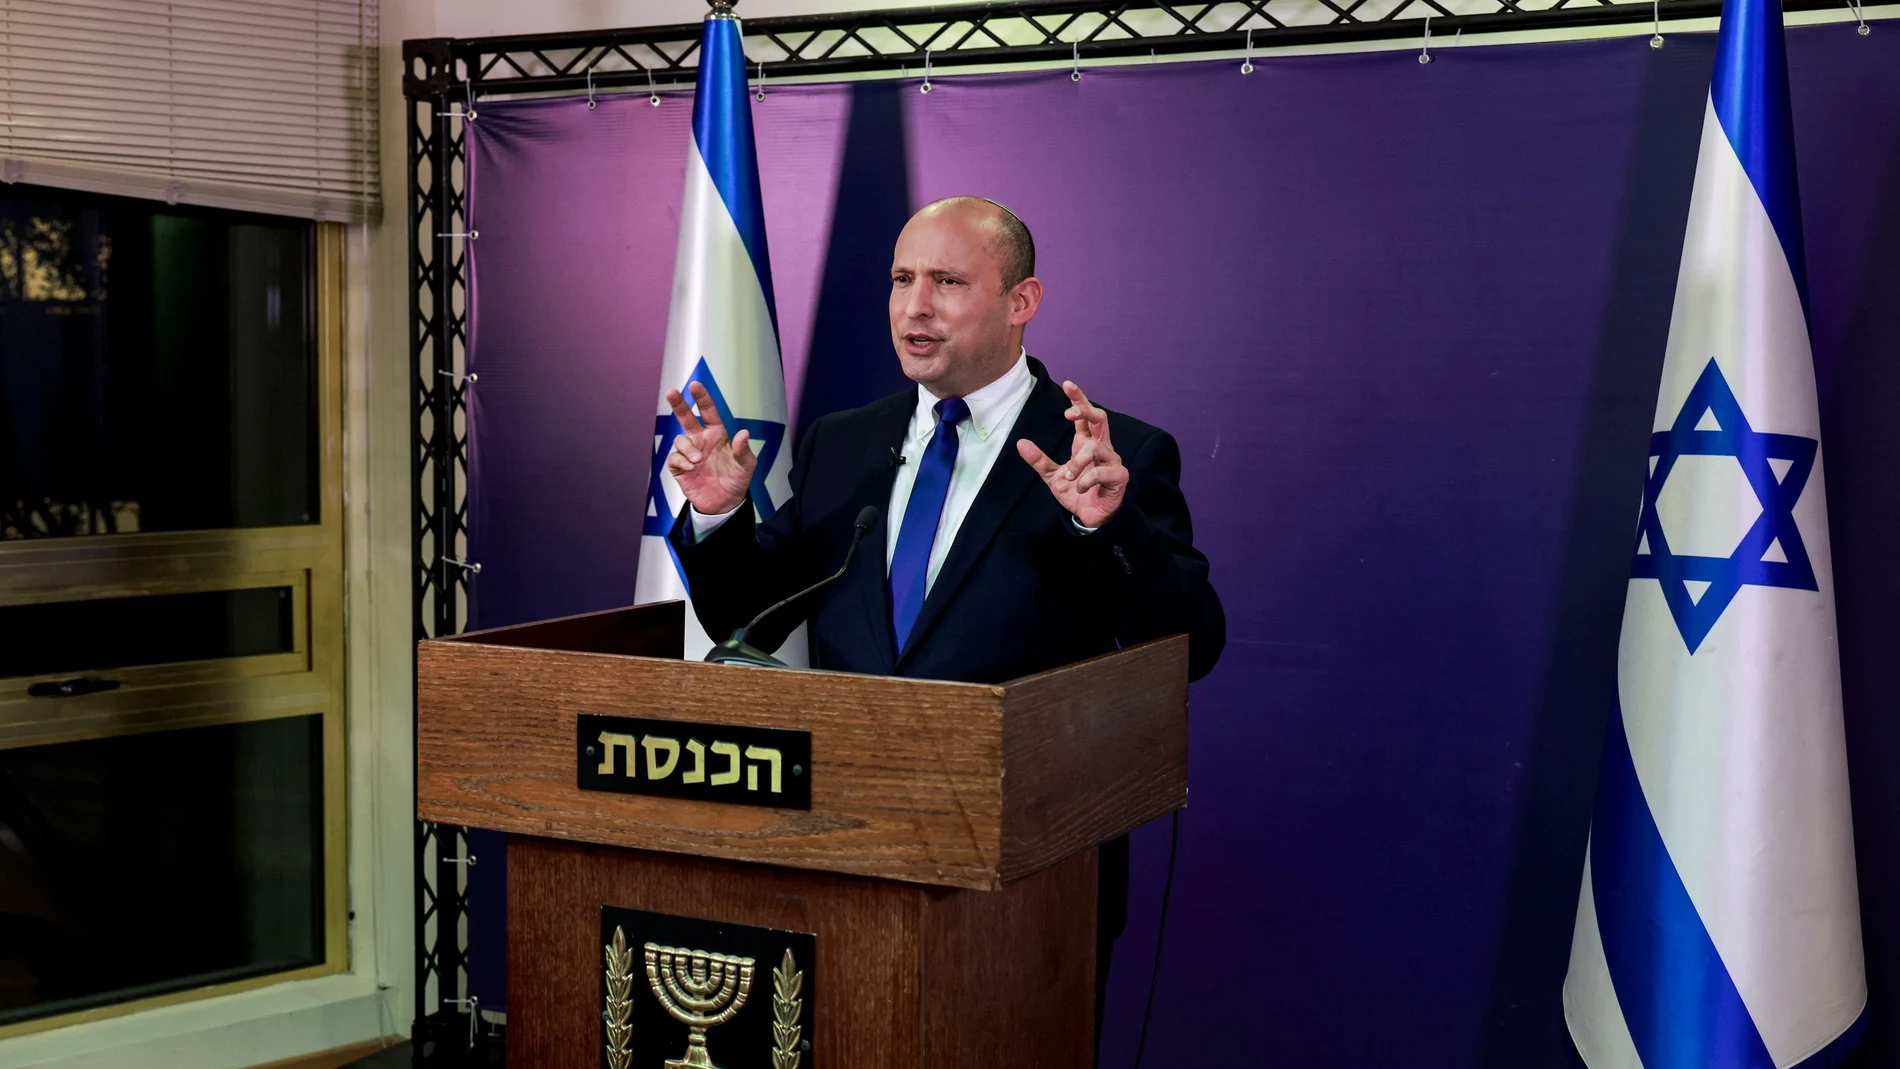 Naftali Bennett, Israeli parliament member from the Yamina party, gestures as he gives a statement at the Knesset, Israel's parliament, in Jerusalem, June 6, 2021. Menahem Kahana/Pool via REUTERS